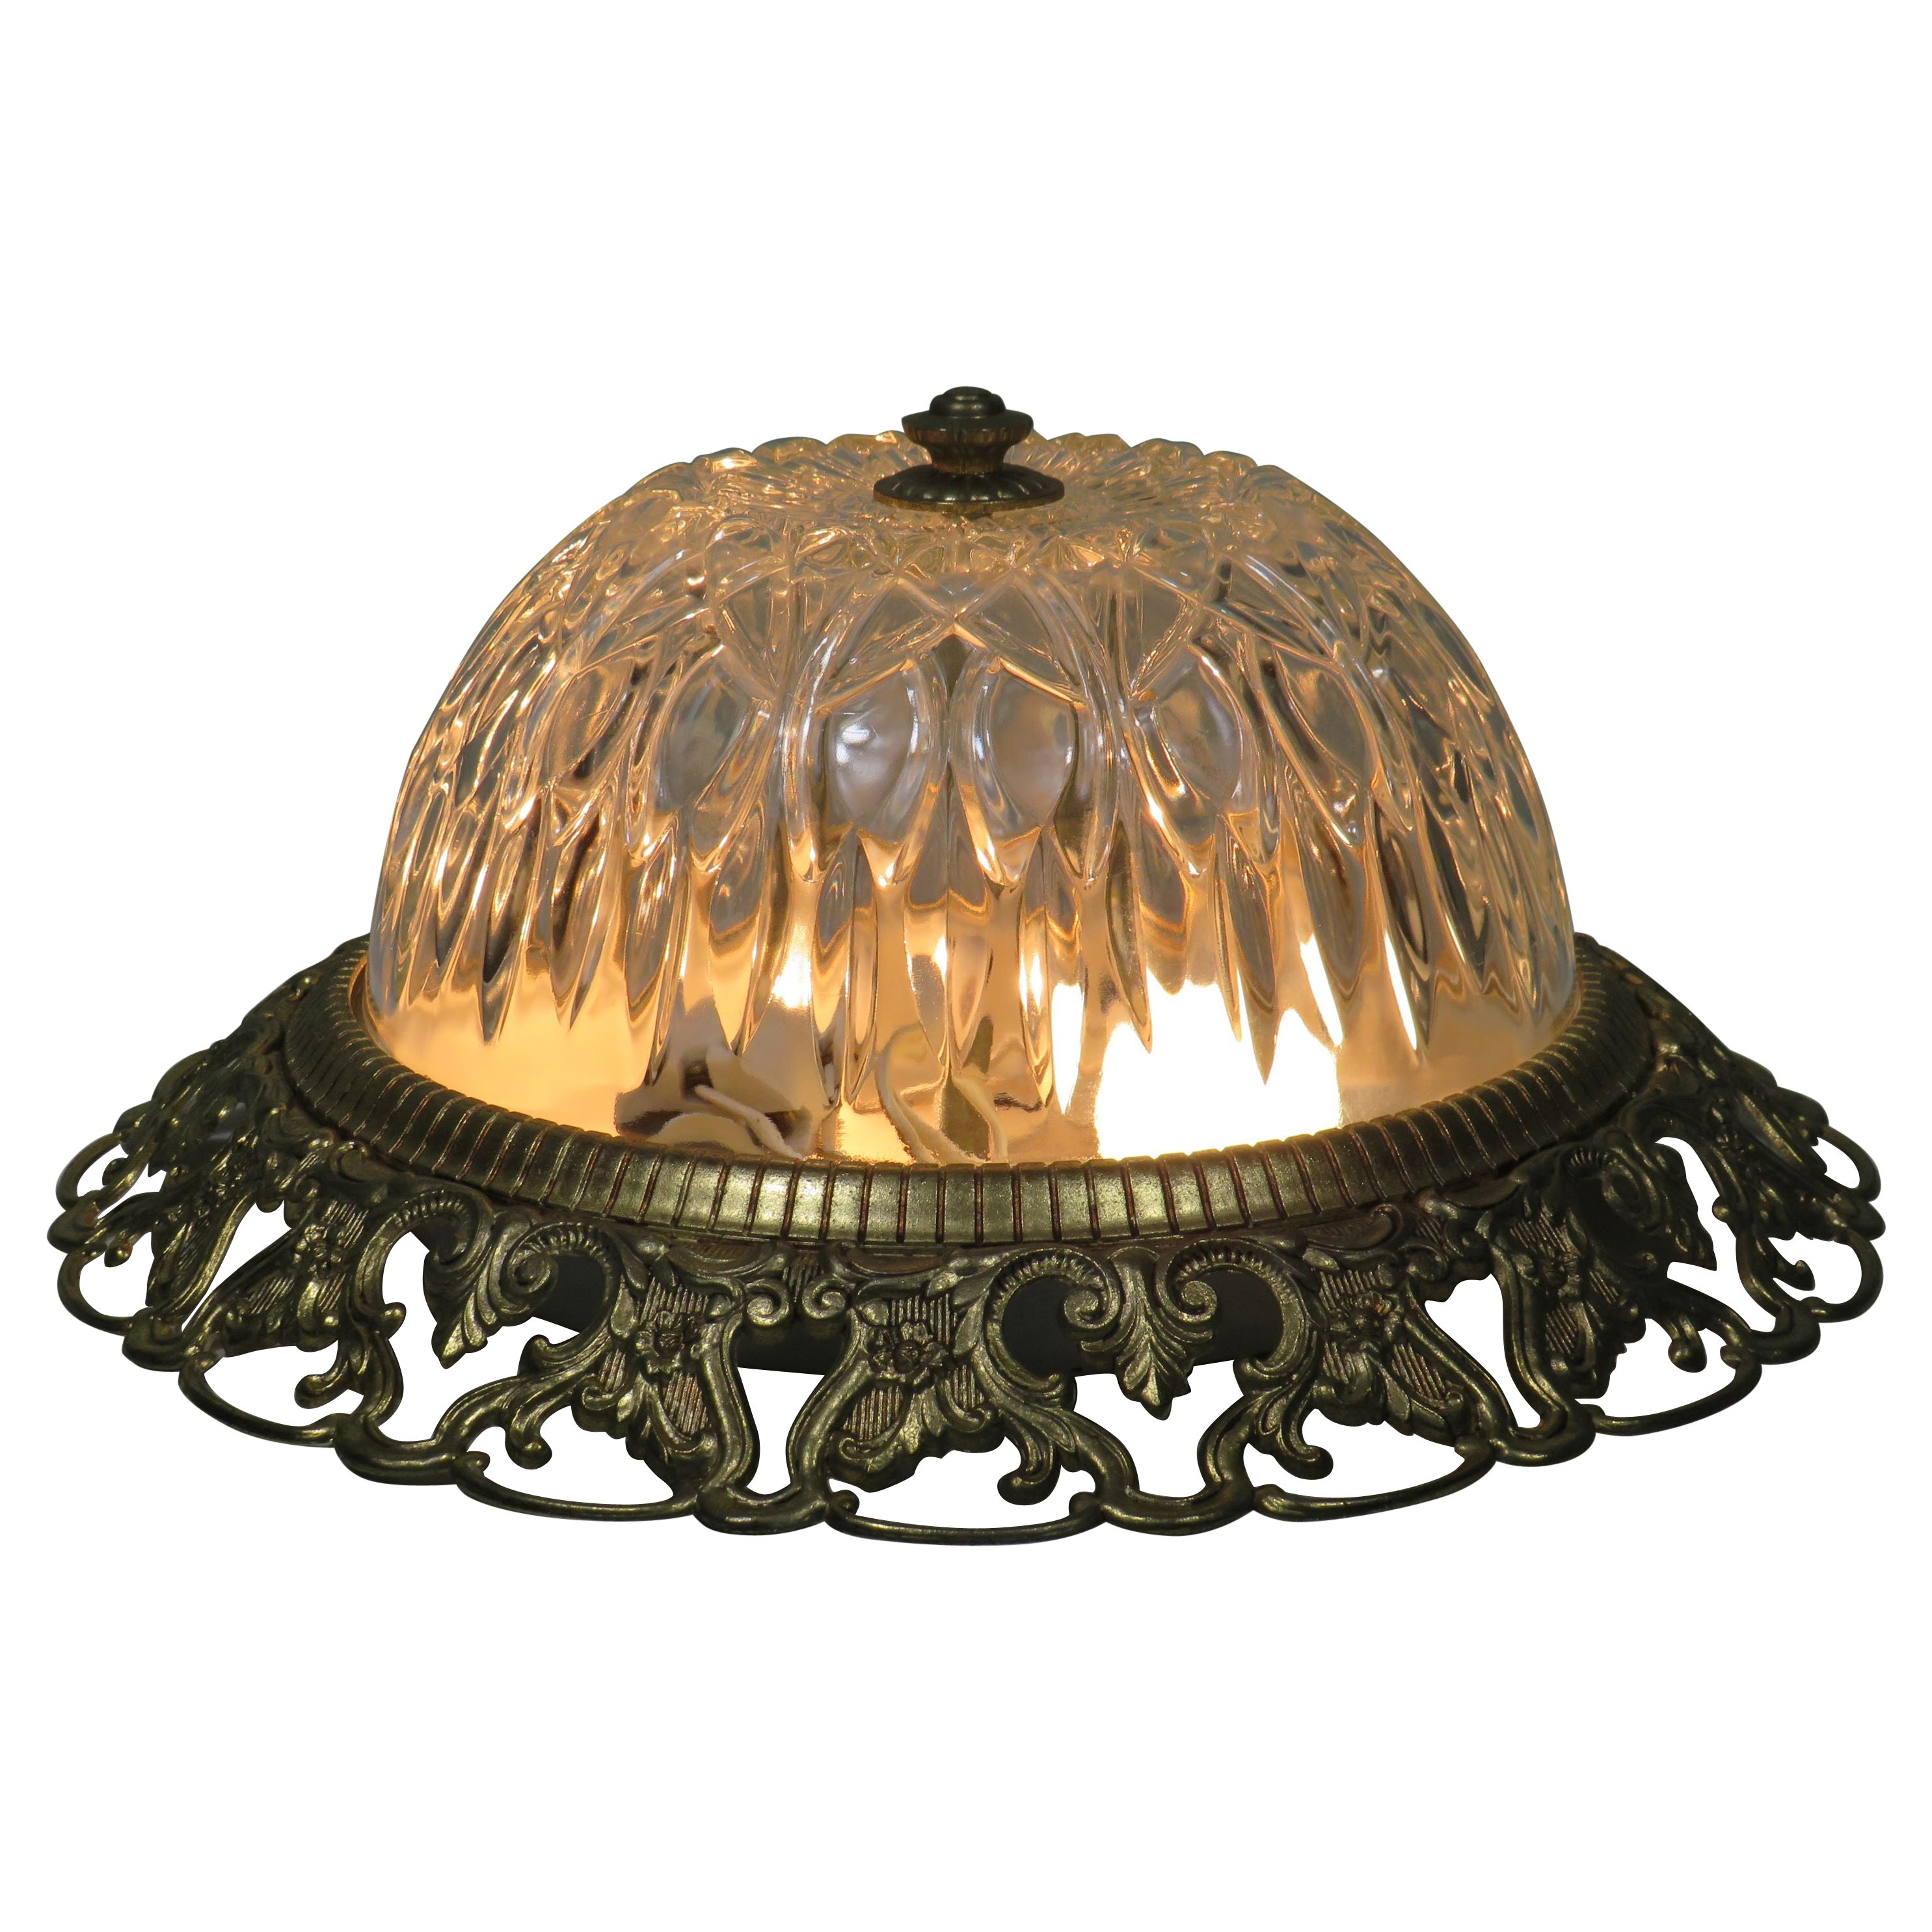 Hollywood Regency ceiling lamp, cut glass and openwork gilded edge.